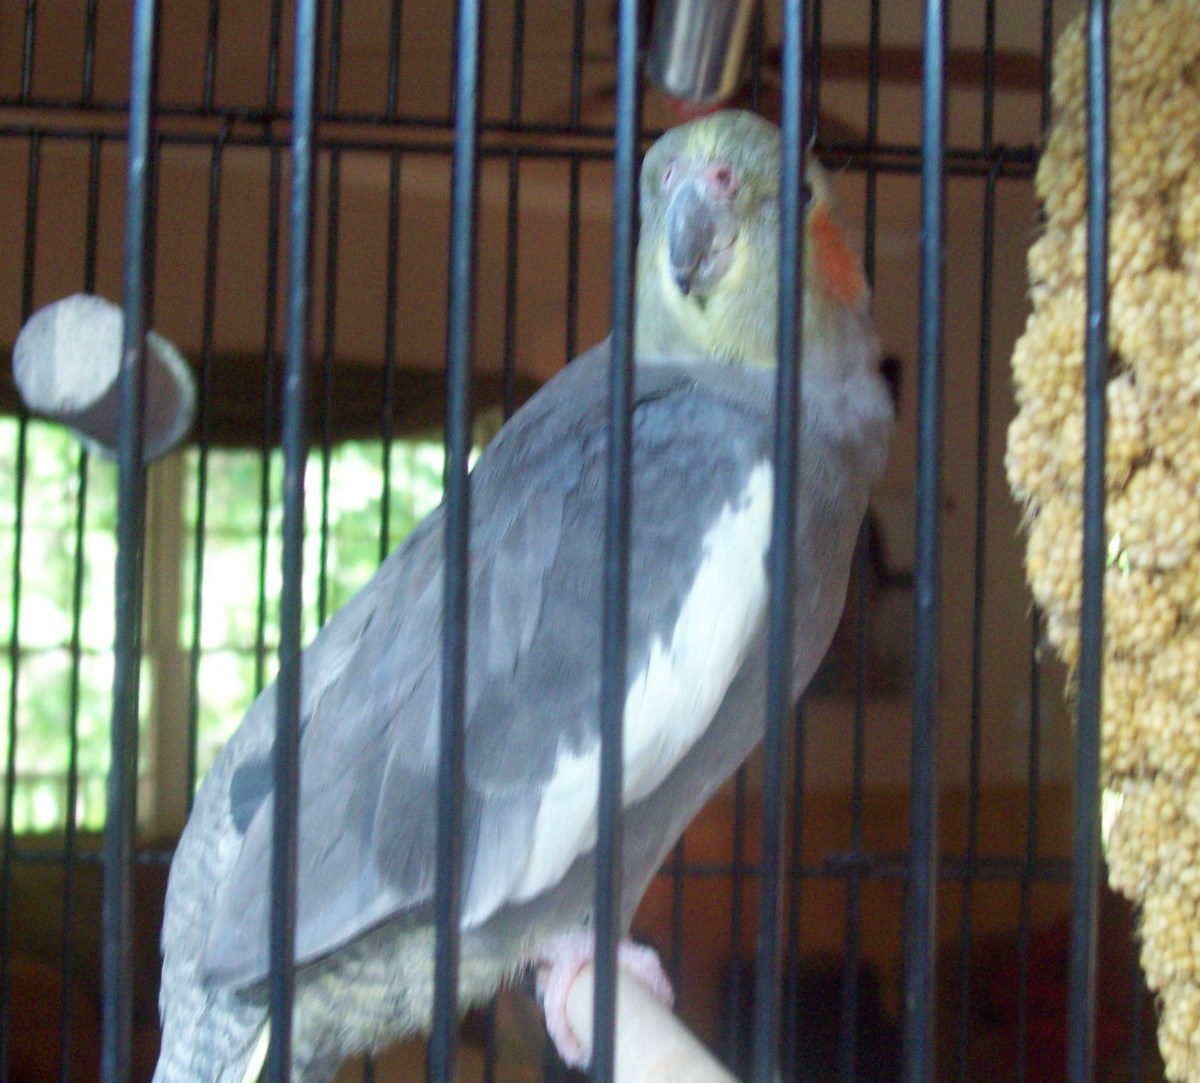 Here's Rocky looking out of his cage. You can see his millet on the right.